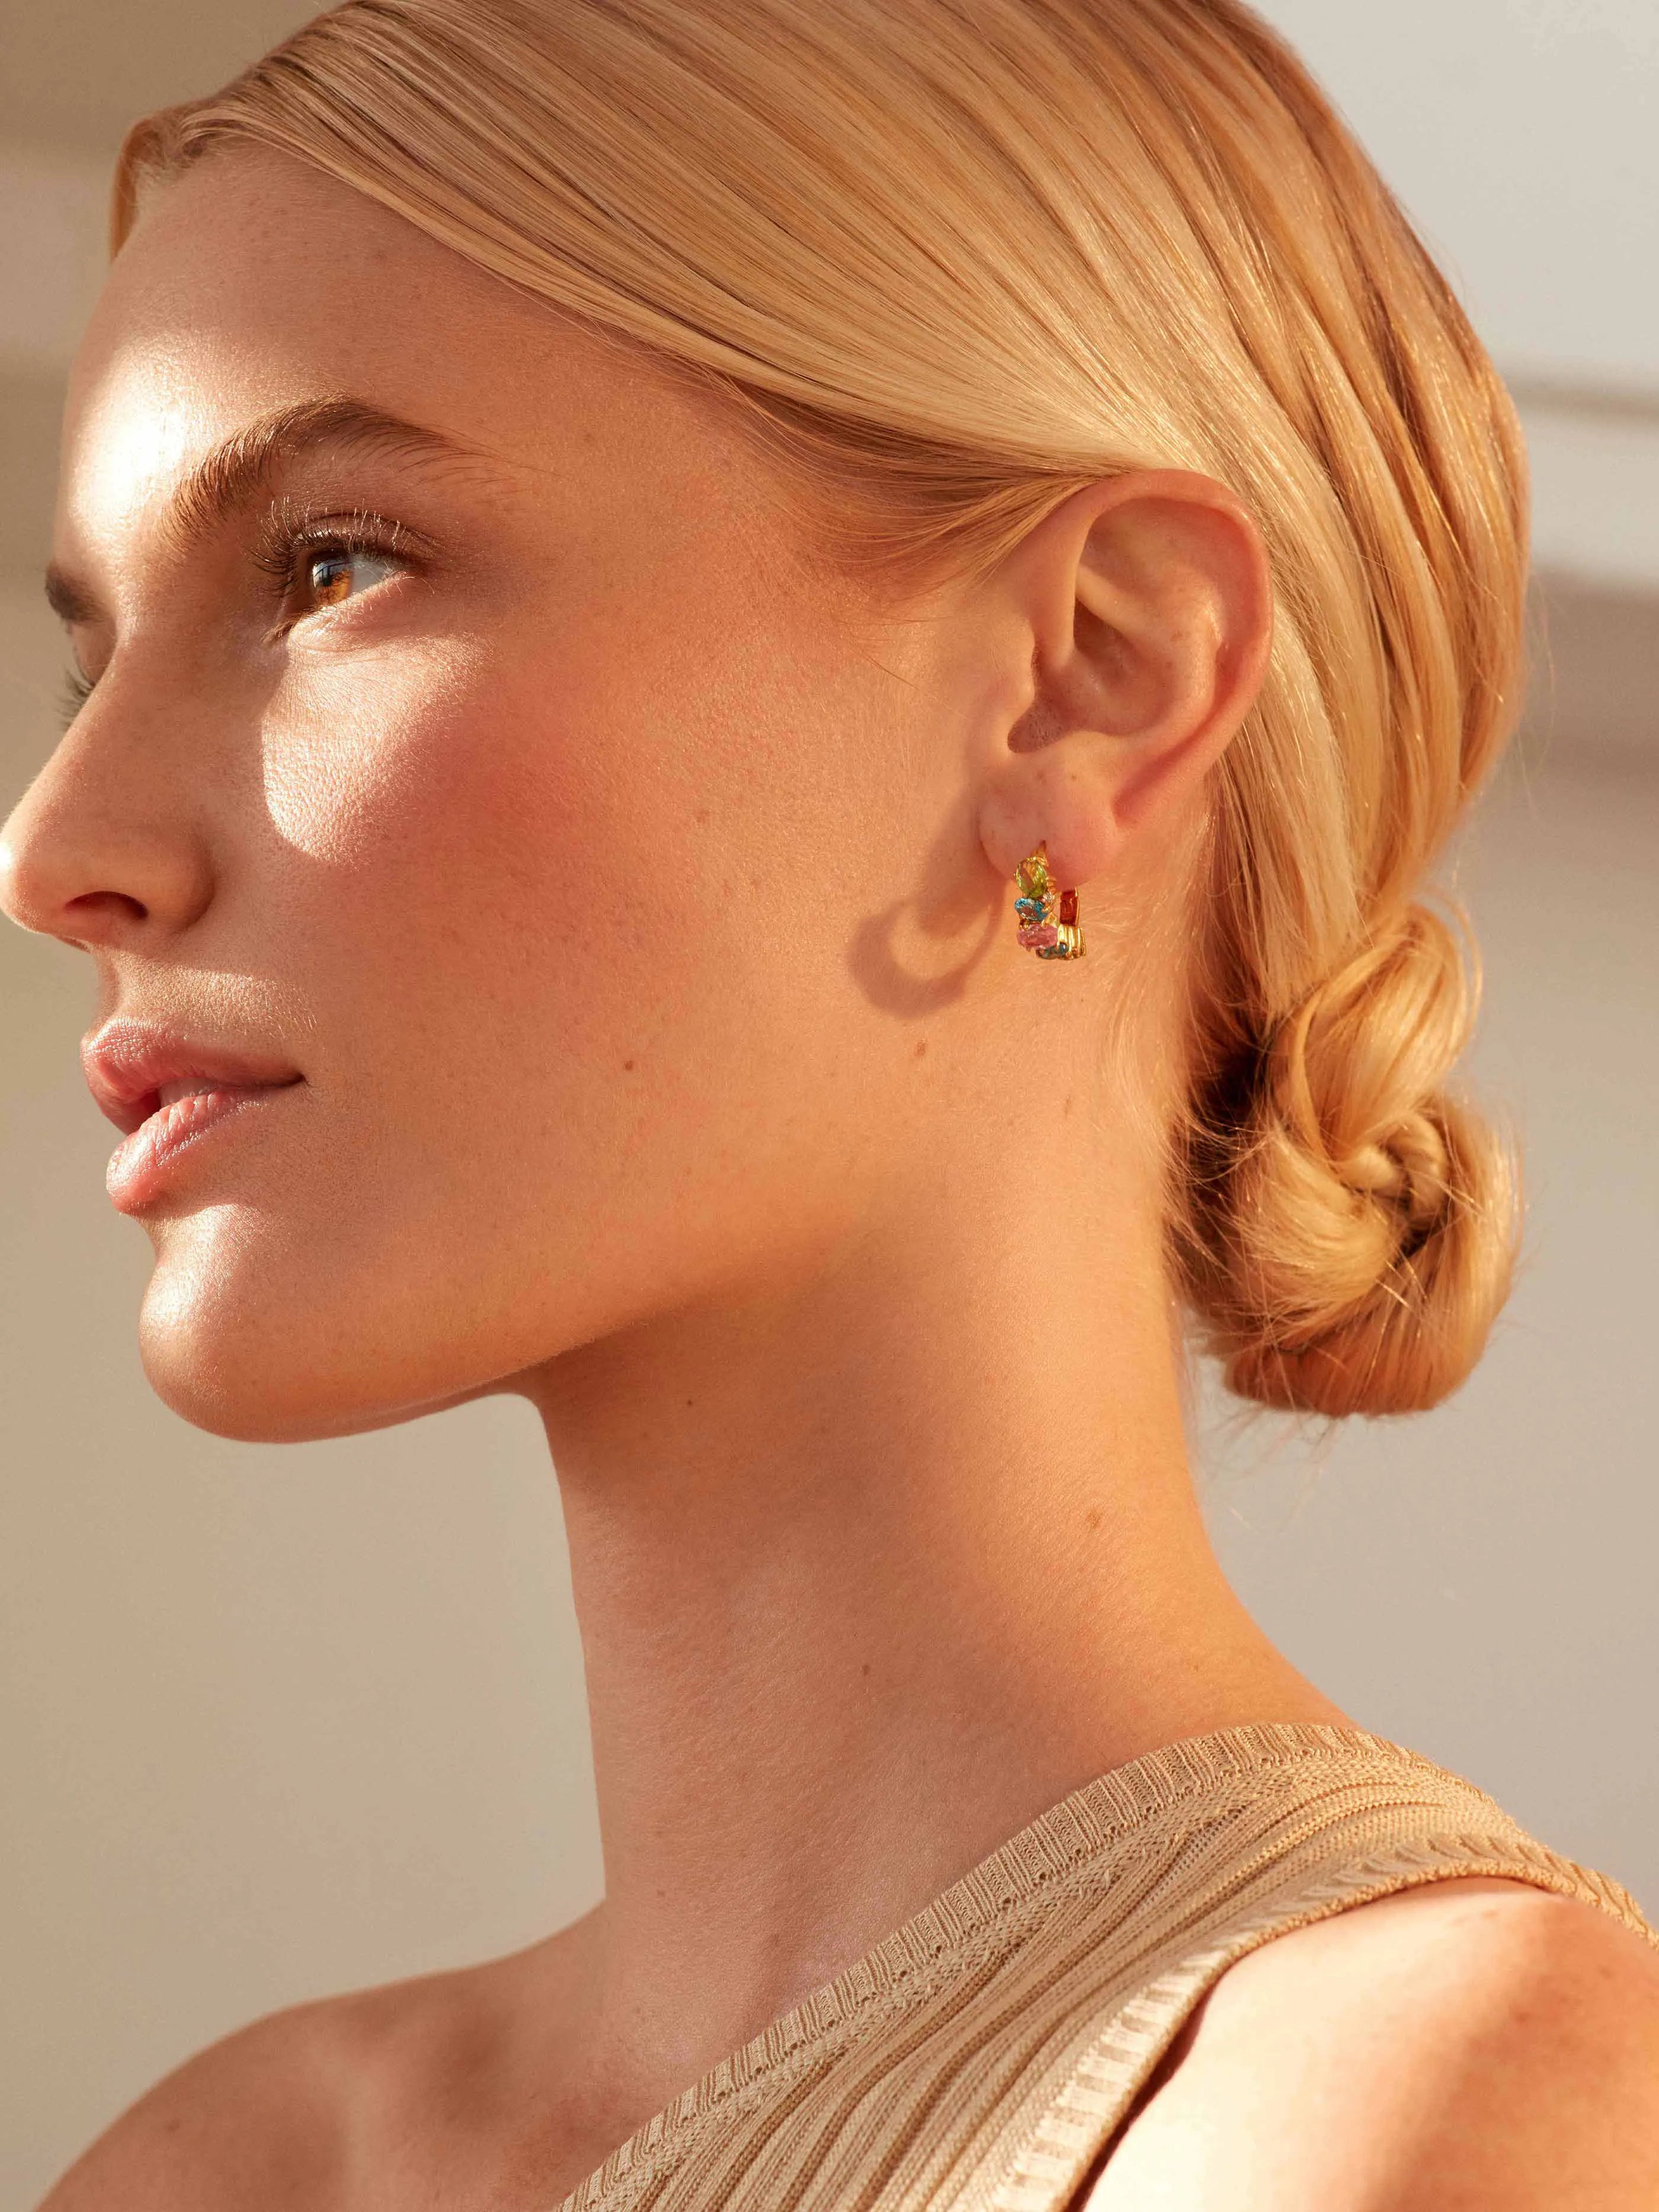 A vibrant summer woman wearing the SHYLA - Nila Huggies Multi - Gold earrings with gold hoops and vibrant colored stones.